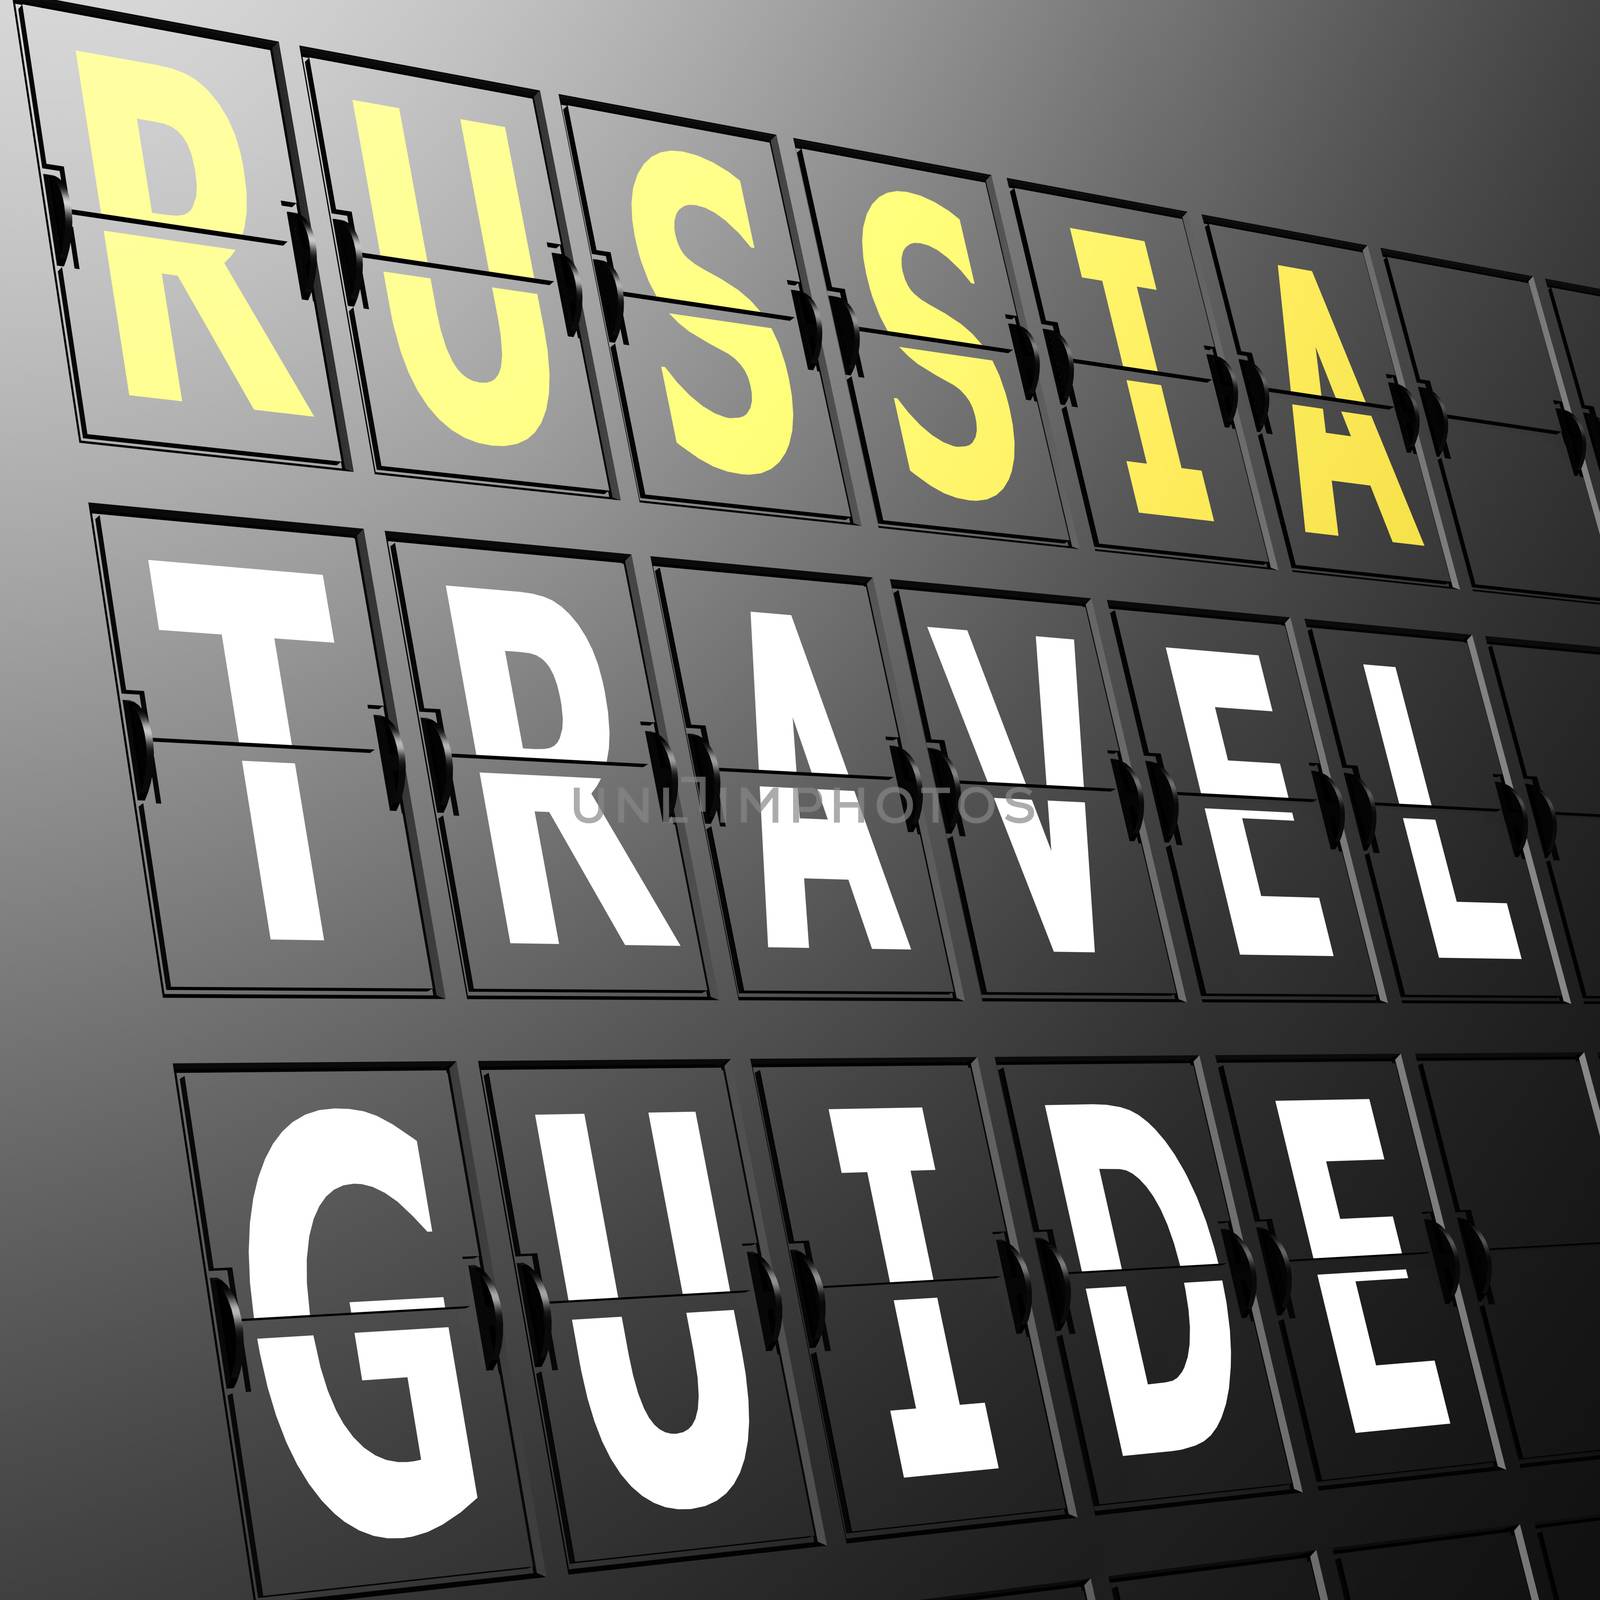 Airport display Russia travel guide by tang90246